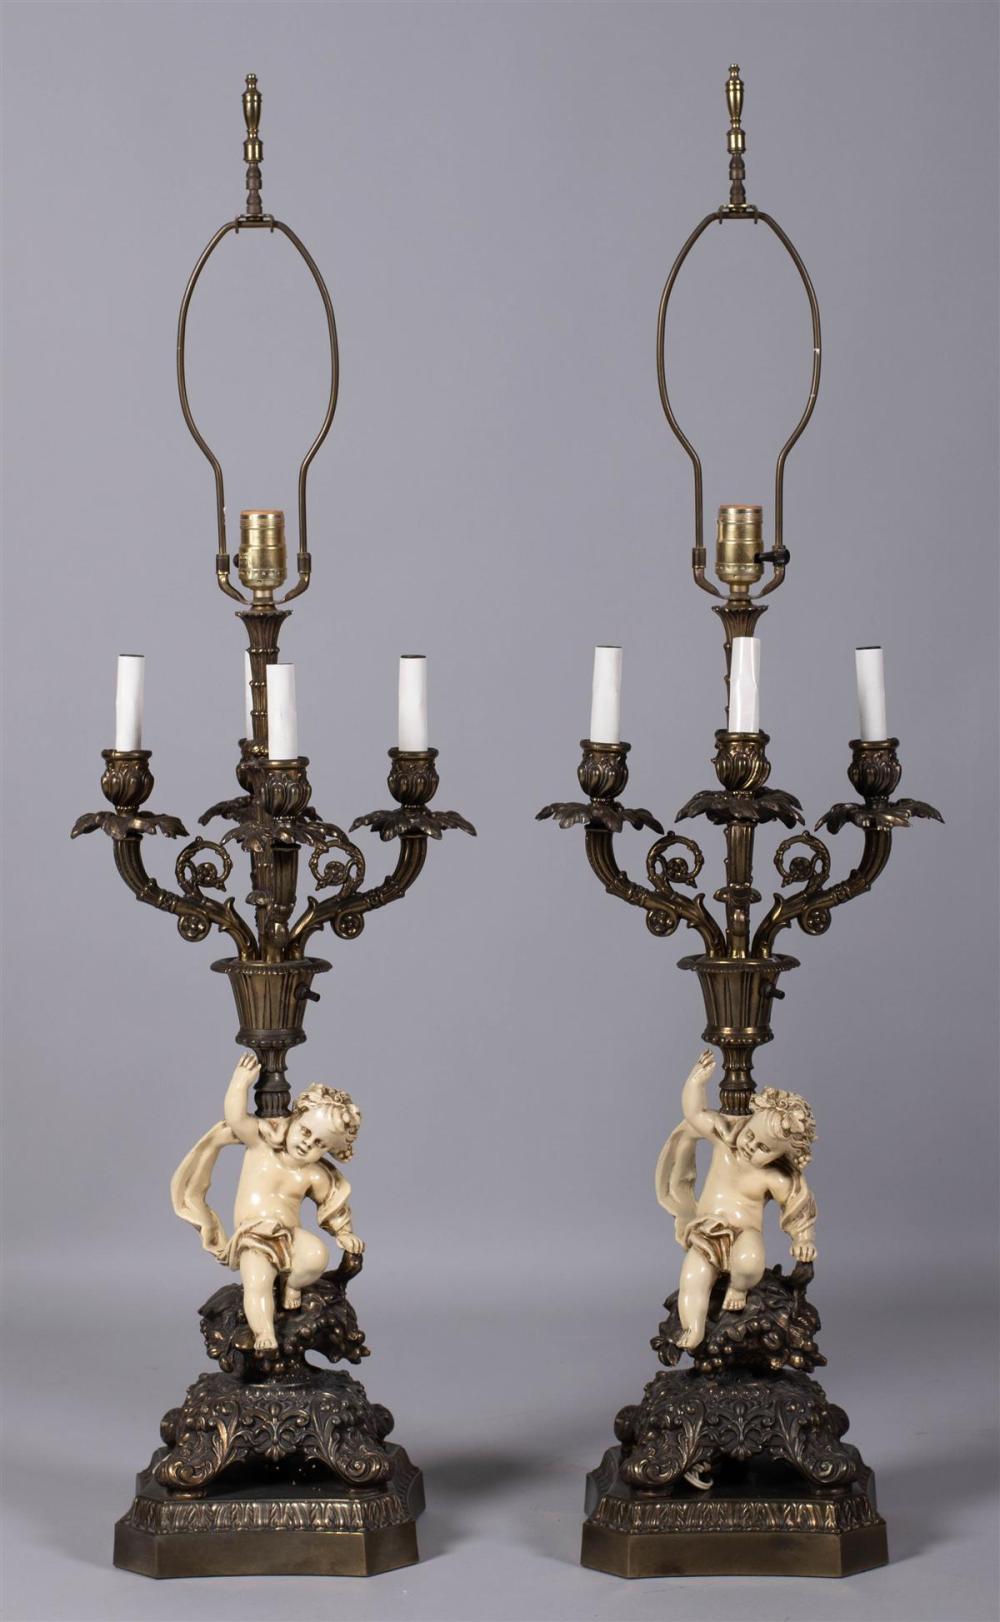 PAIR OF GLAZED POTTERY PUTTO LAMPS